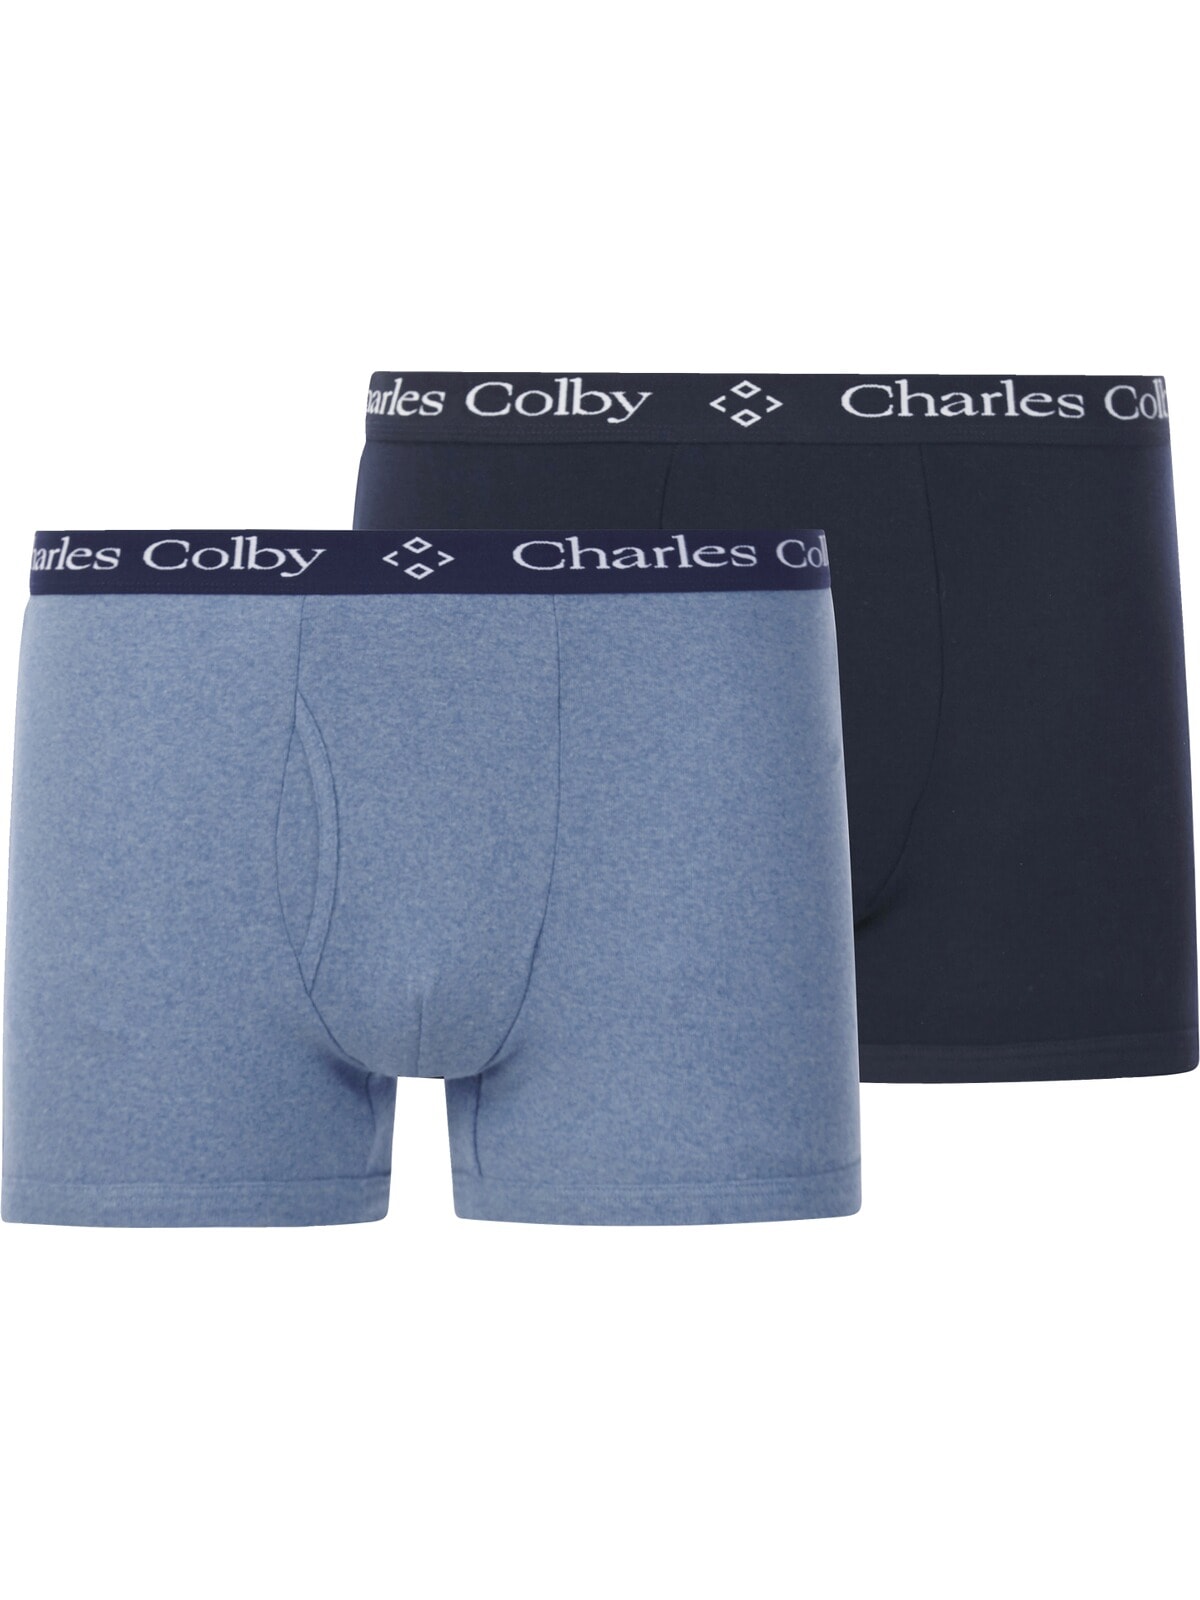 Charles Colby Retro Pants »2er Pack Retropant LORD TROYS«, (2 St.), in zwei Farbvarianten